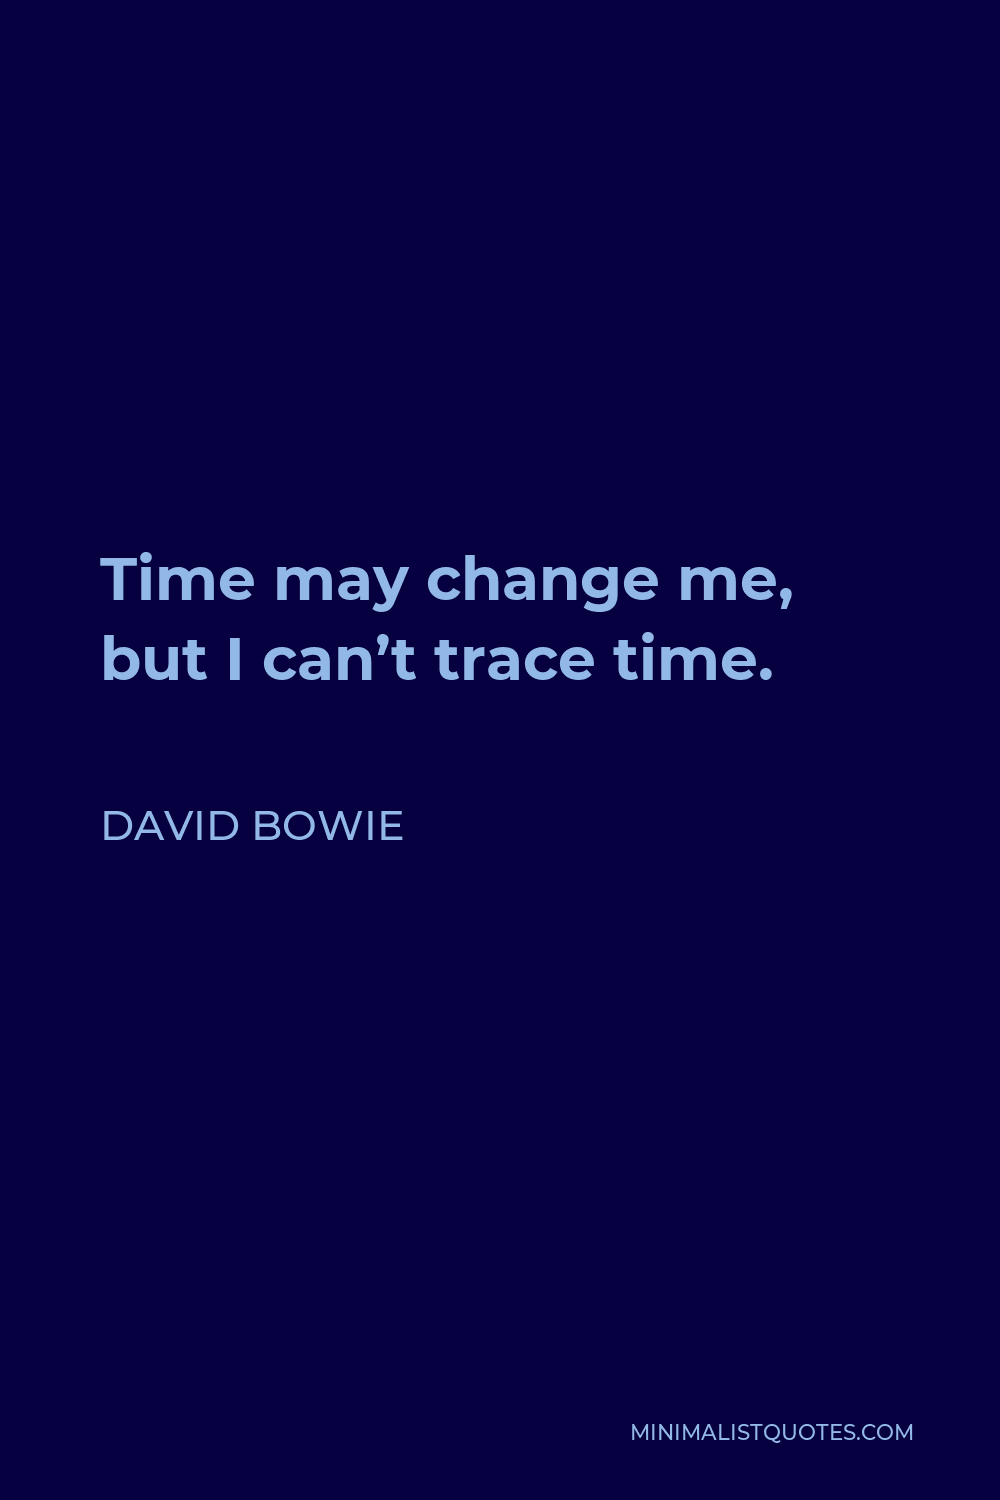 David Bowie Quote - Time may change me, but I can’t trace time.